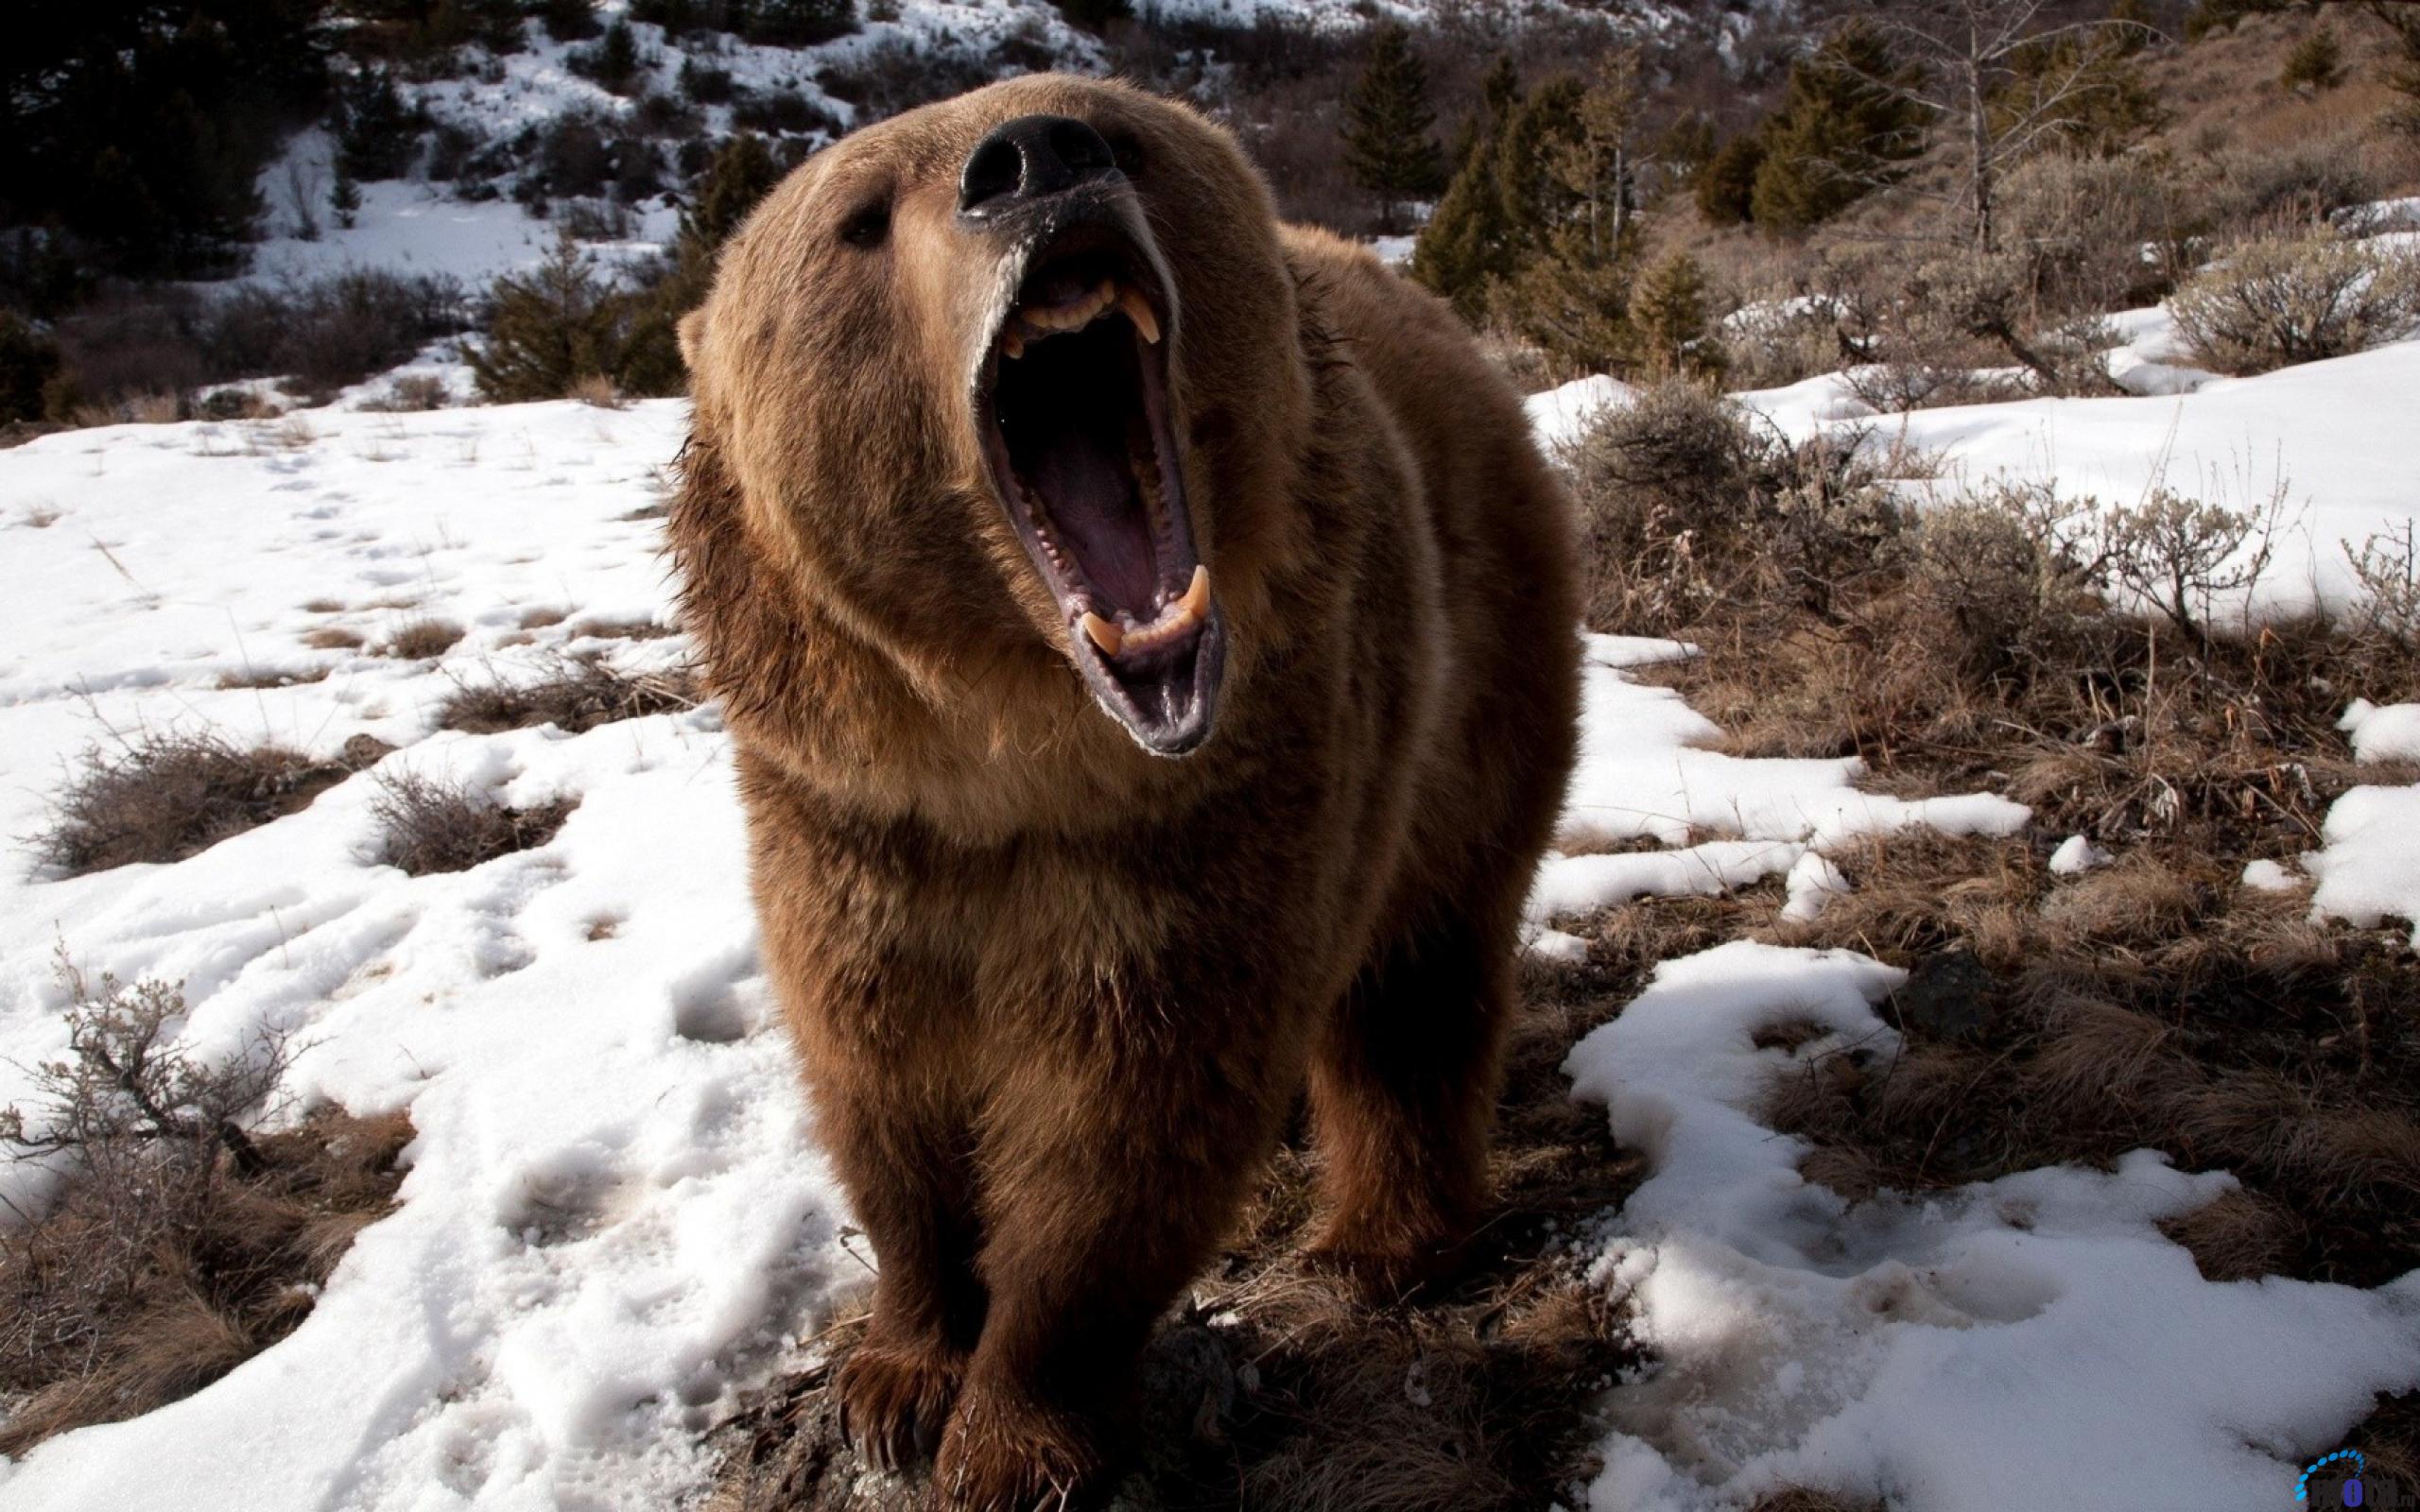 Mouth of a grizzly bear